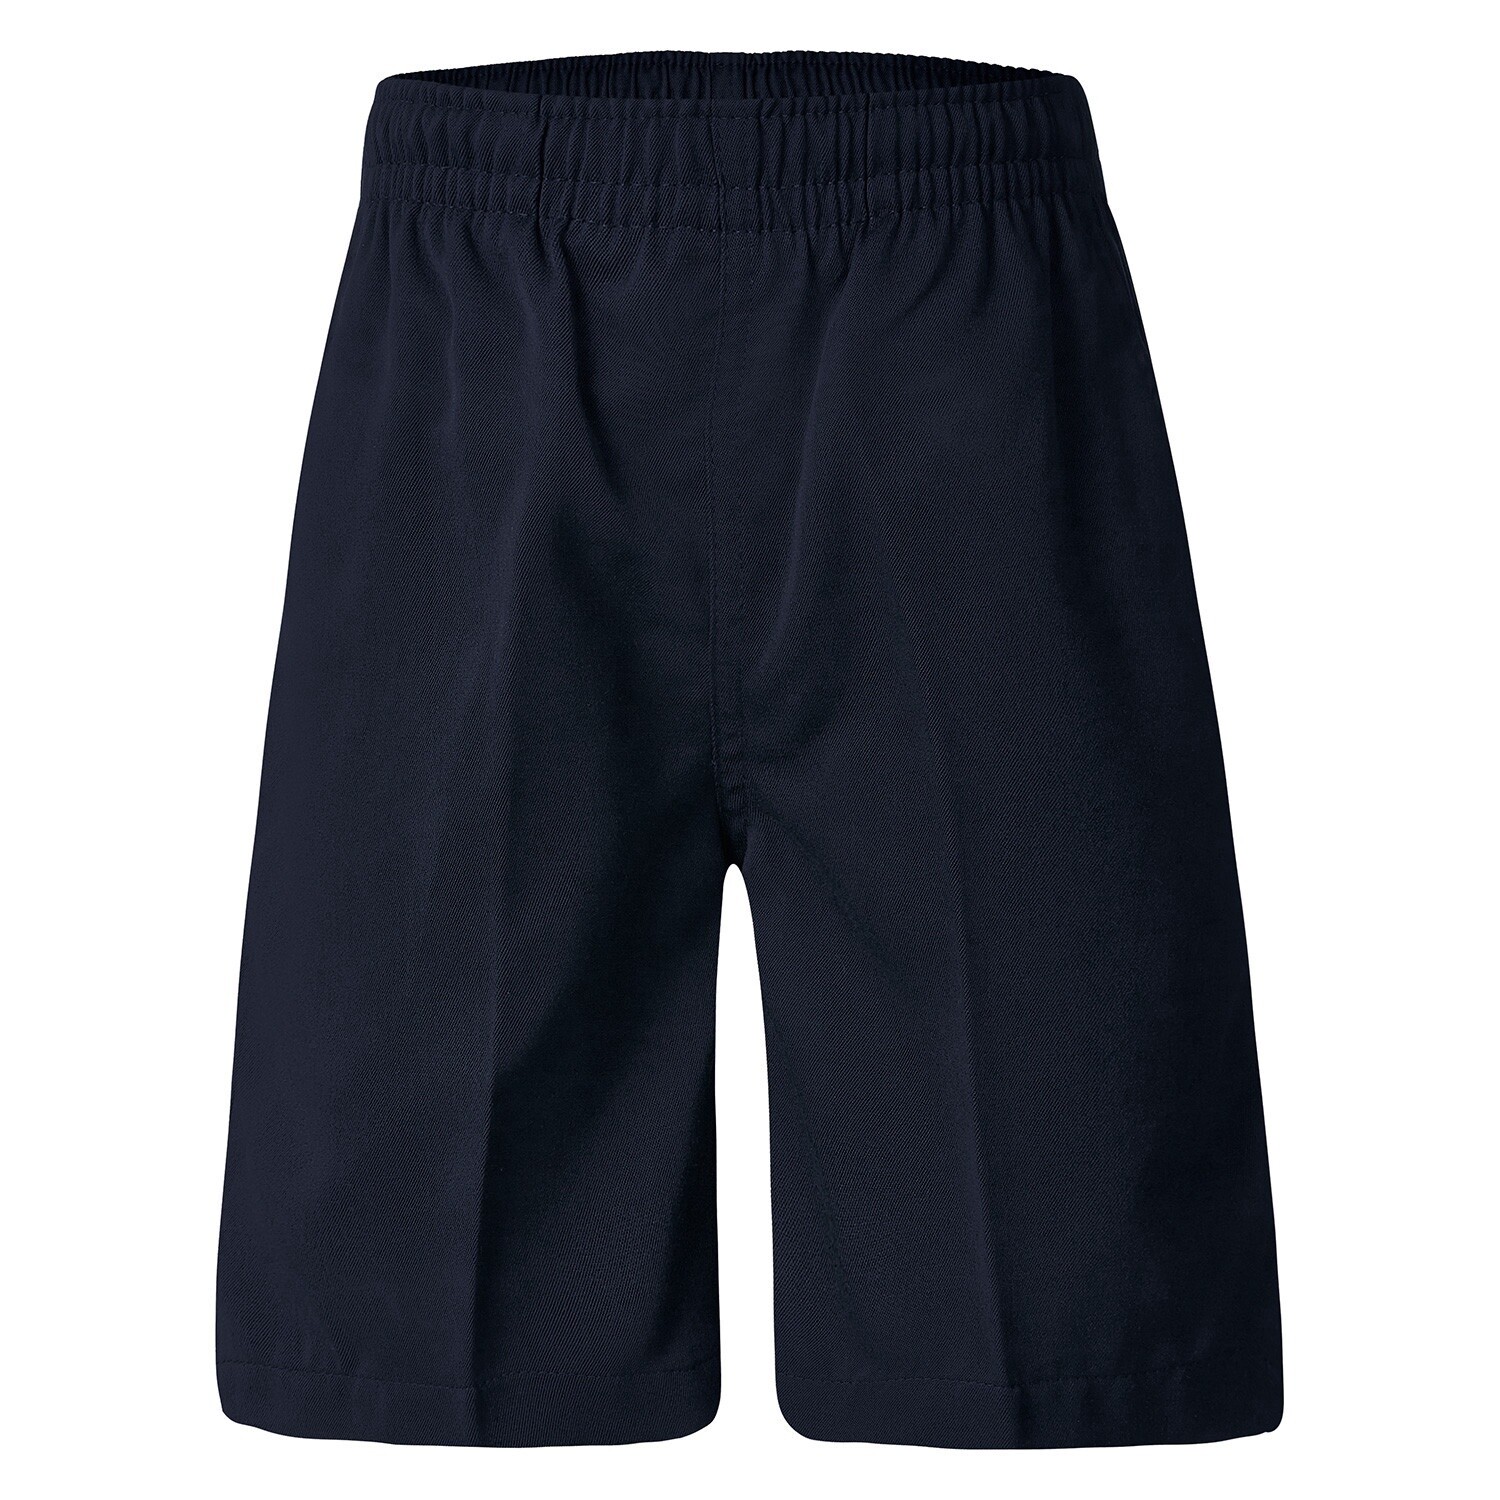 SS Peter and Paul- Boys Navy Shorts, Size: 4